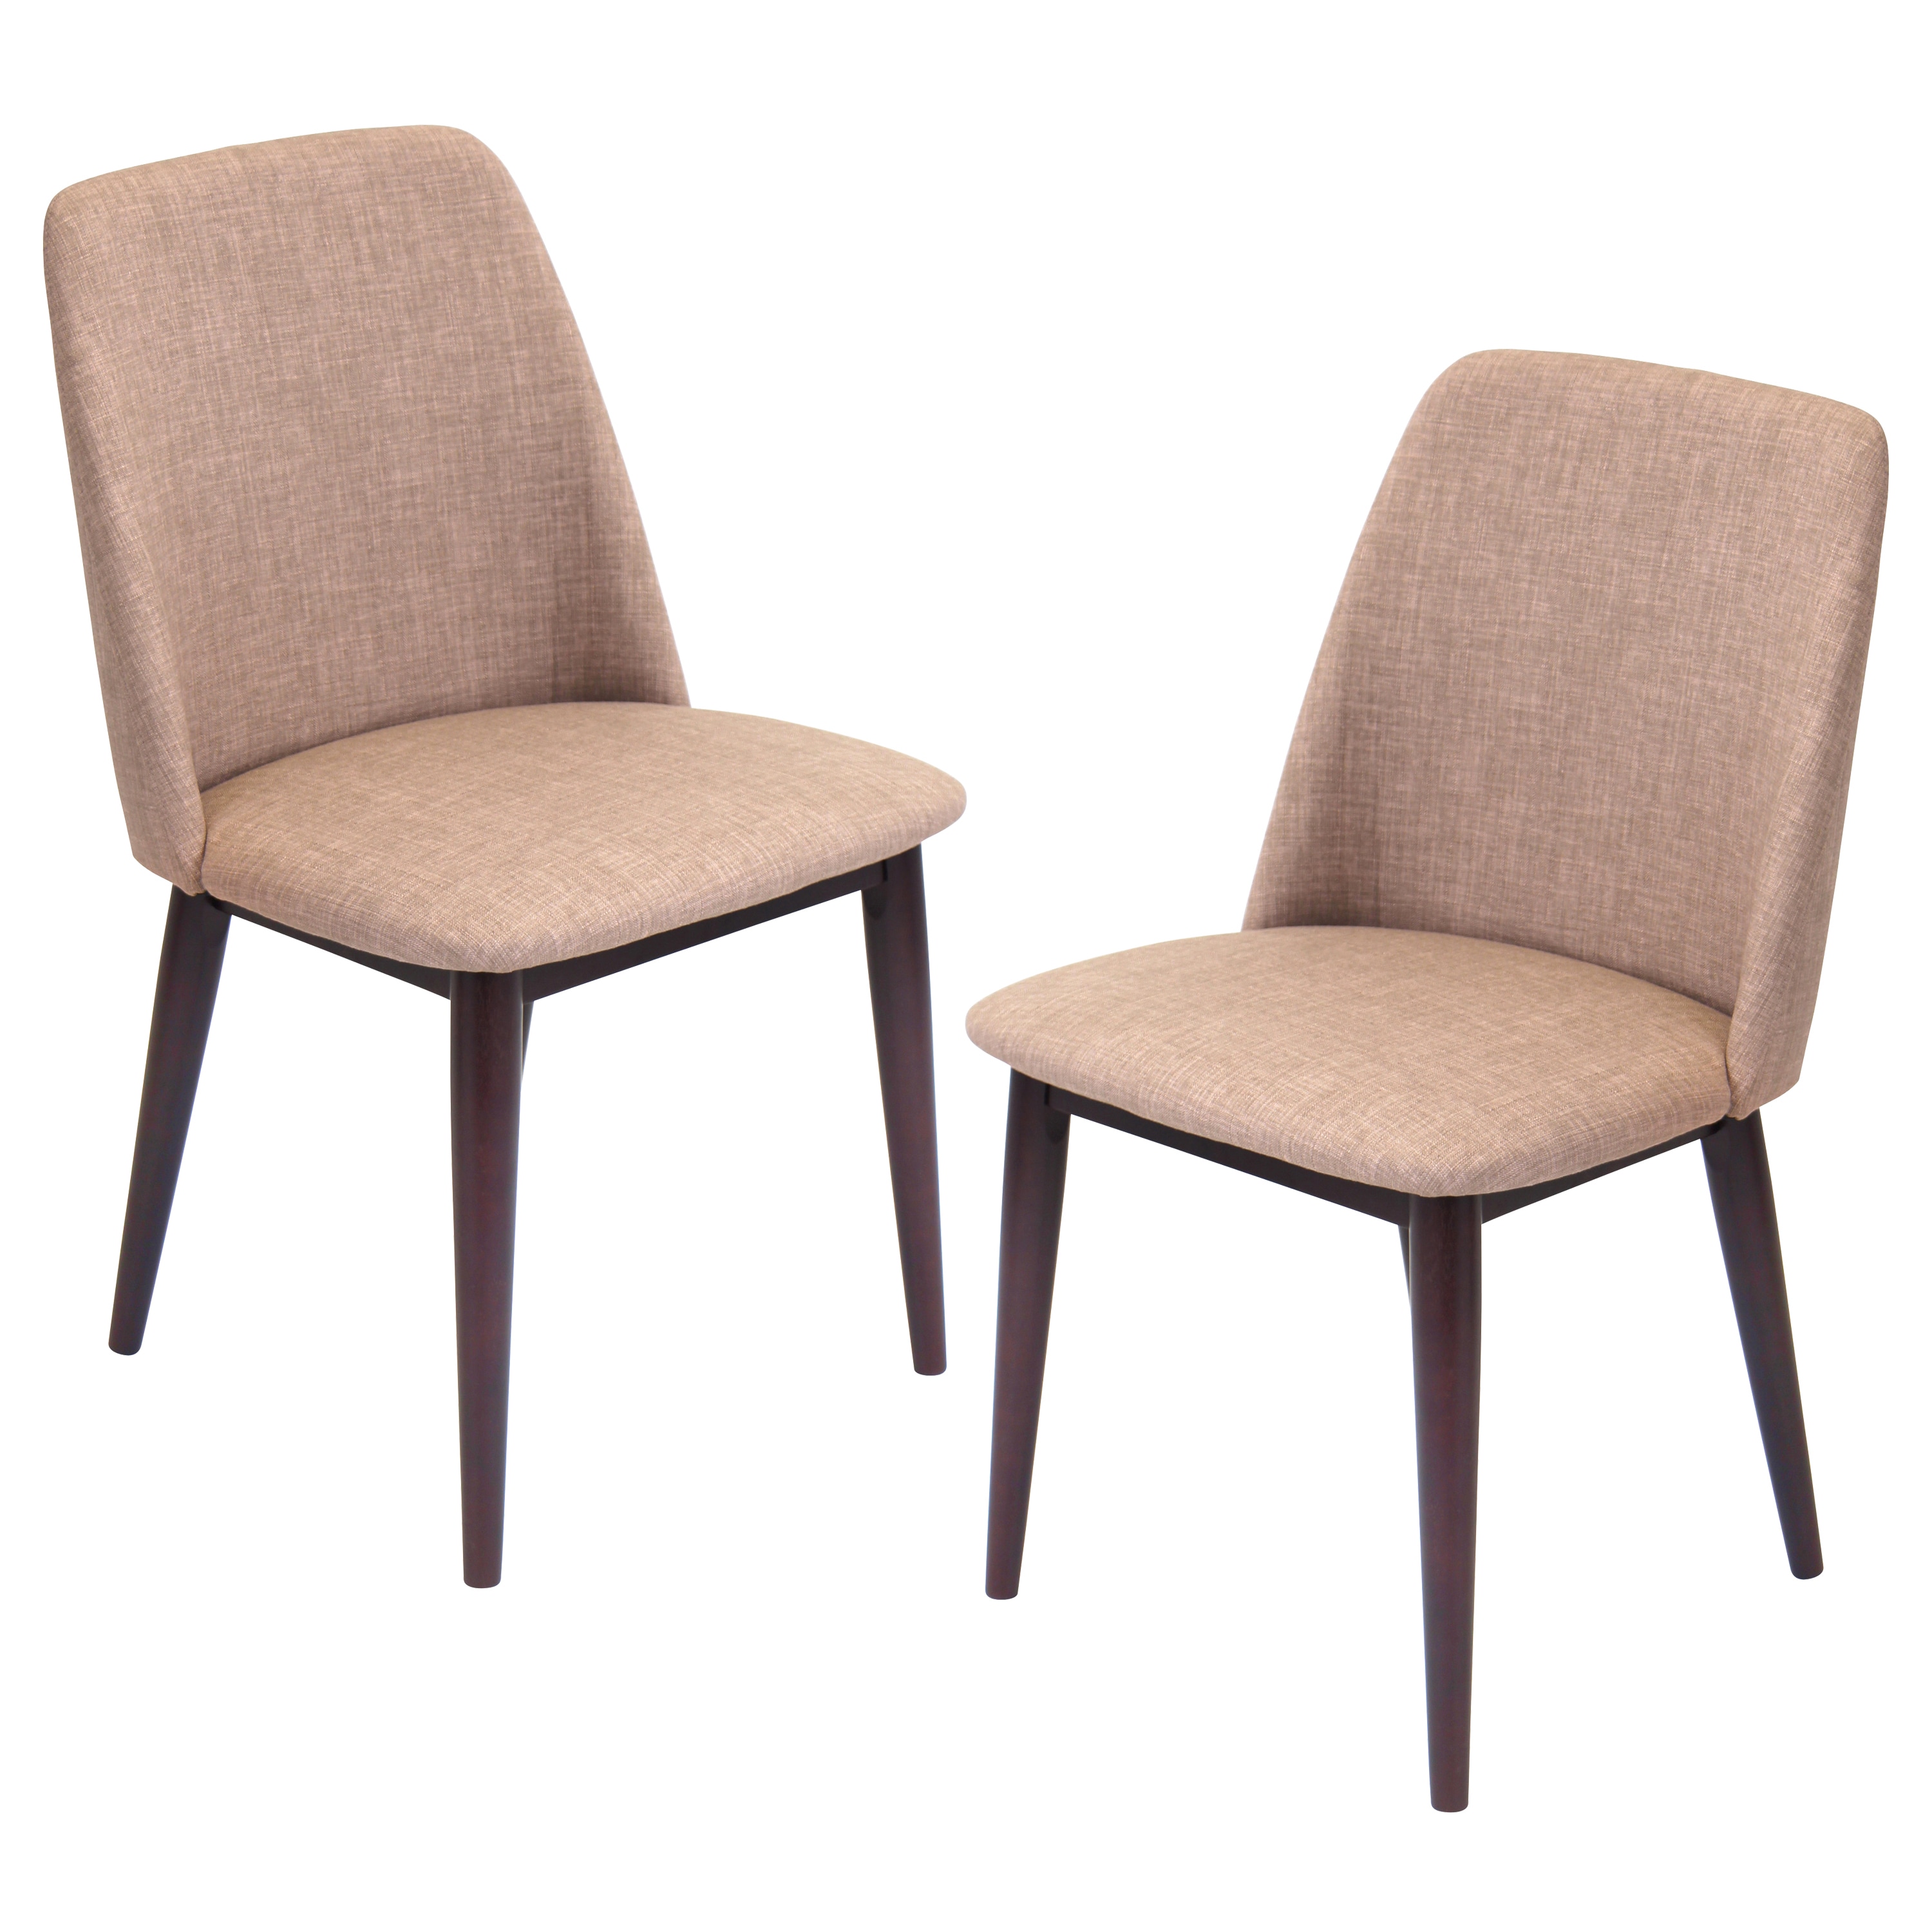 Shop Tintori Mid-Century Modern Dining Chairs in Wood and Fabric (Set